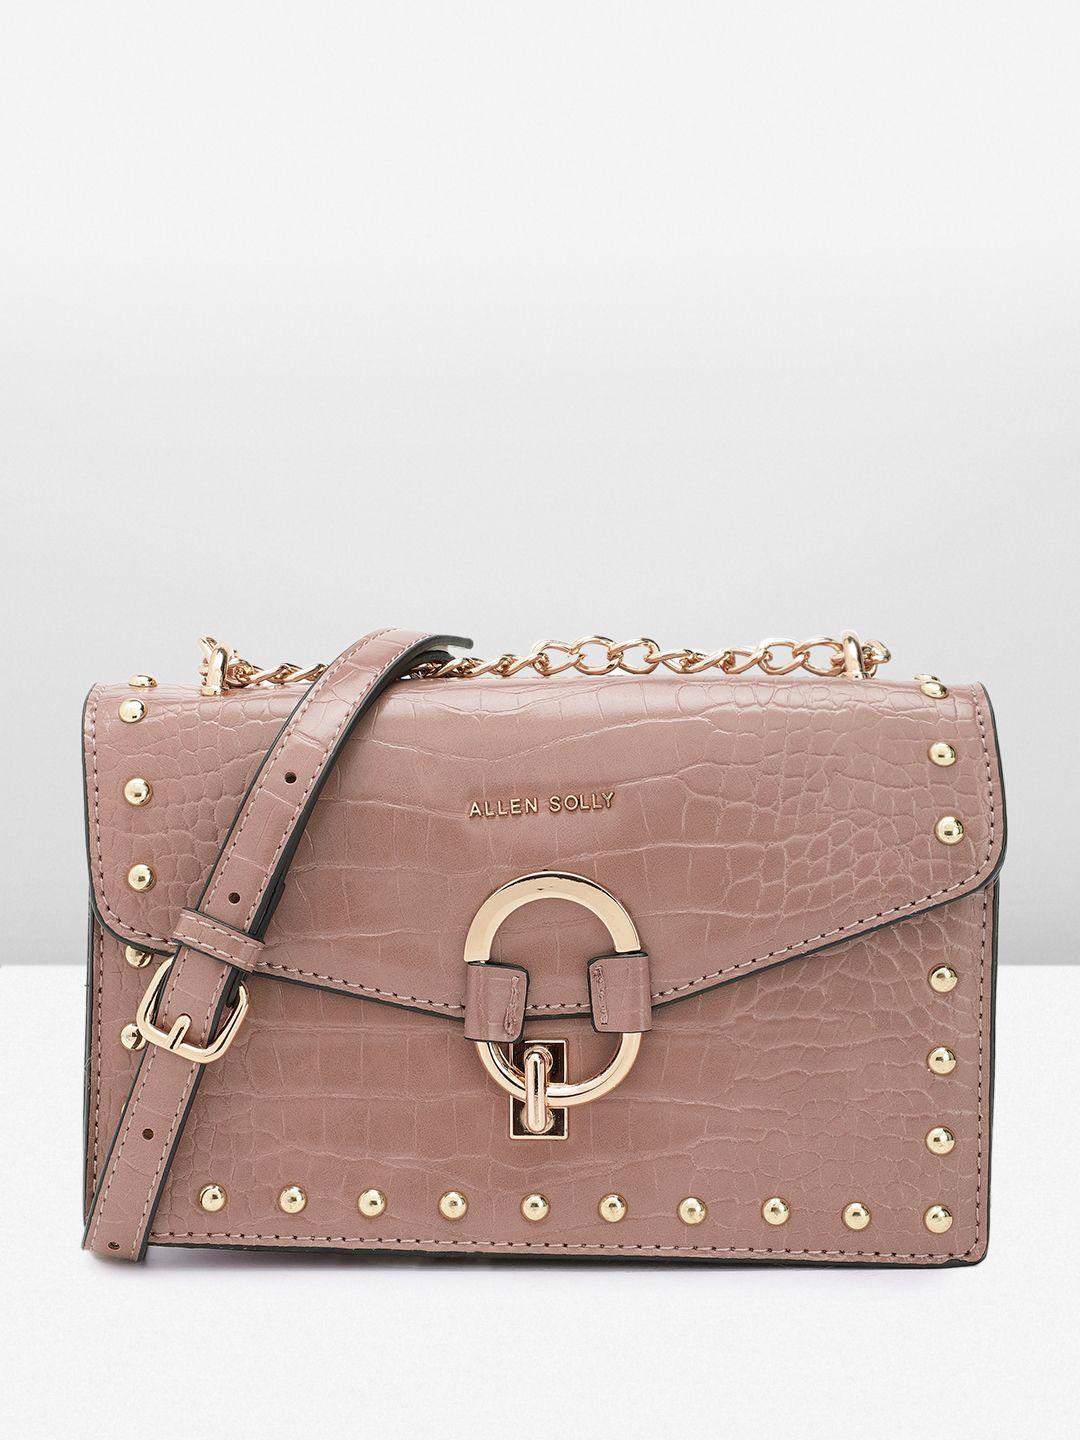 allen solly animal textured structured sling bag